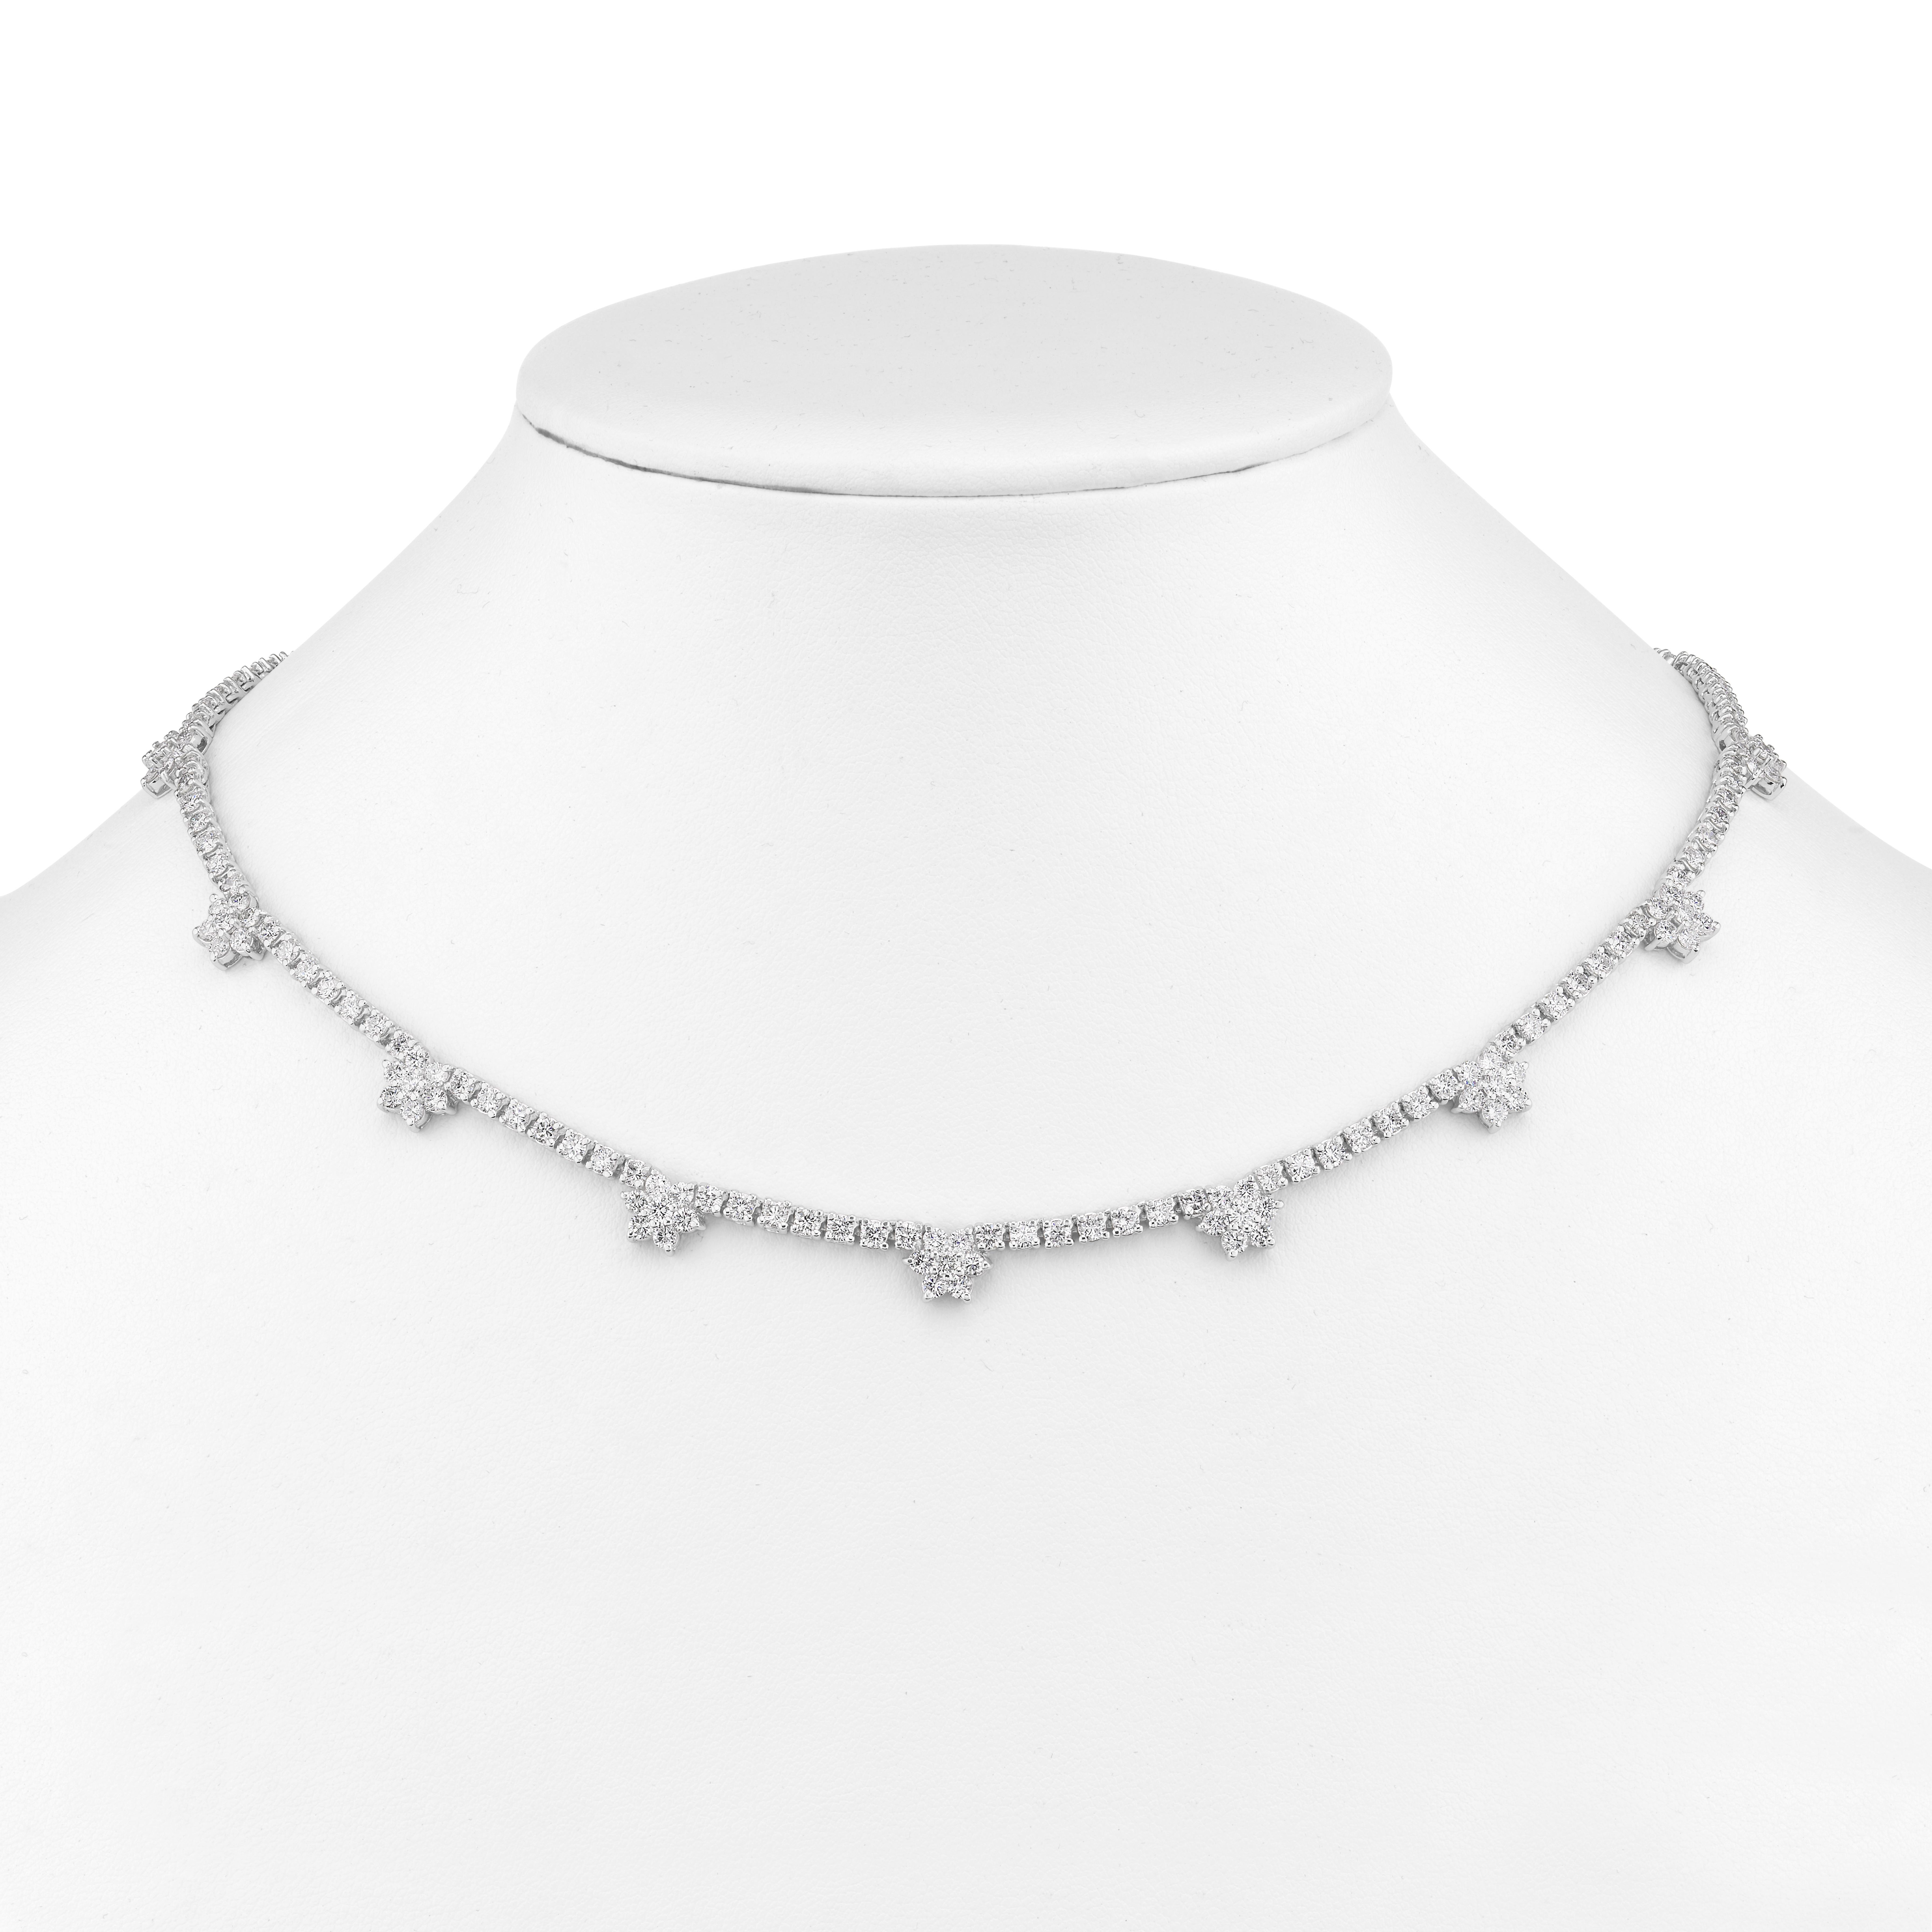 Stunning 10.75ct. total weight of G color SI clarity diamond necklace is set in 14kt white gold is 16 1/4 inches. If you don't see something, say something! We would be happy to work with you to create your dream piece of jewelry! 